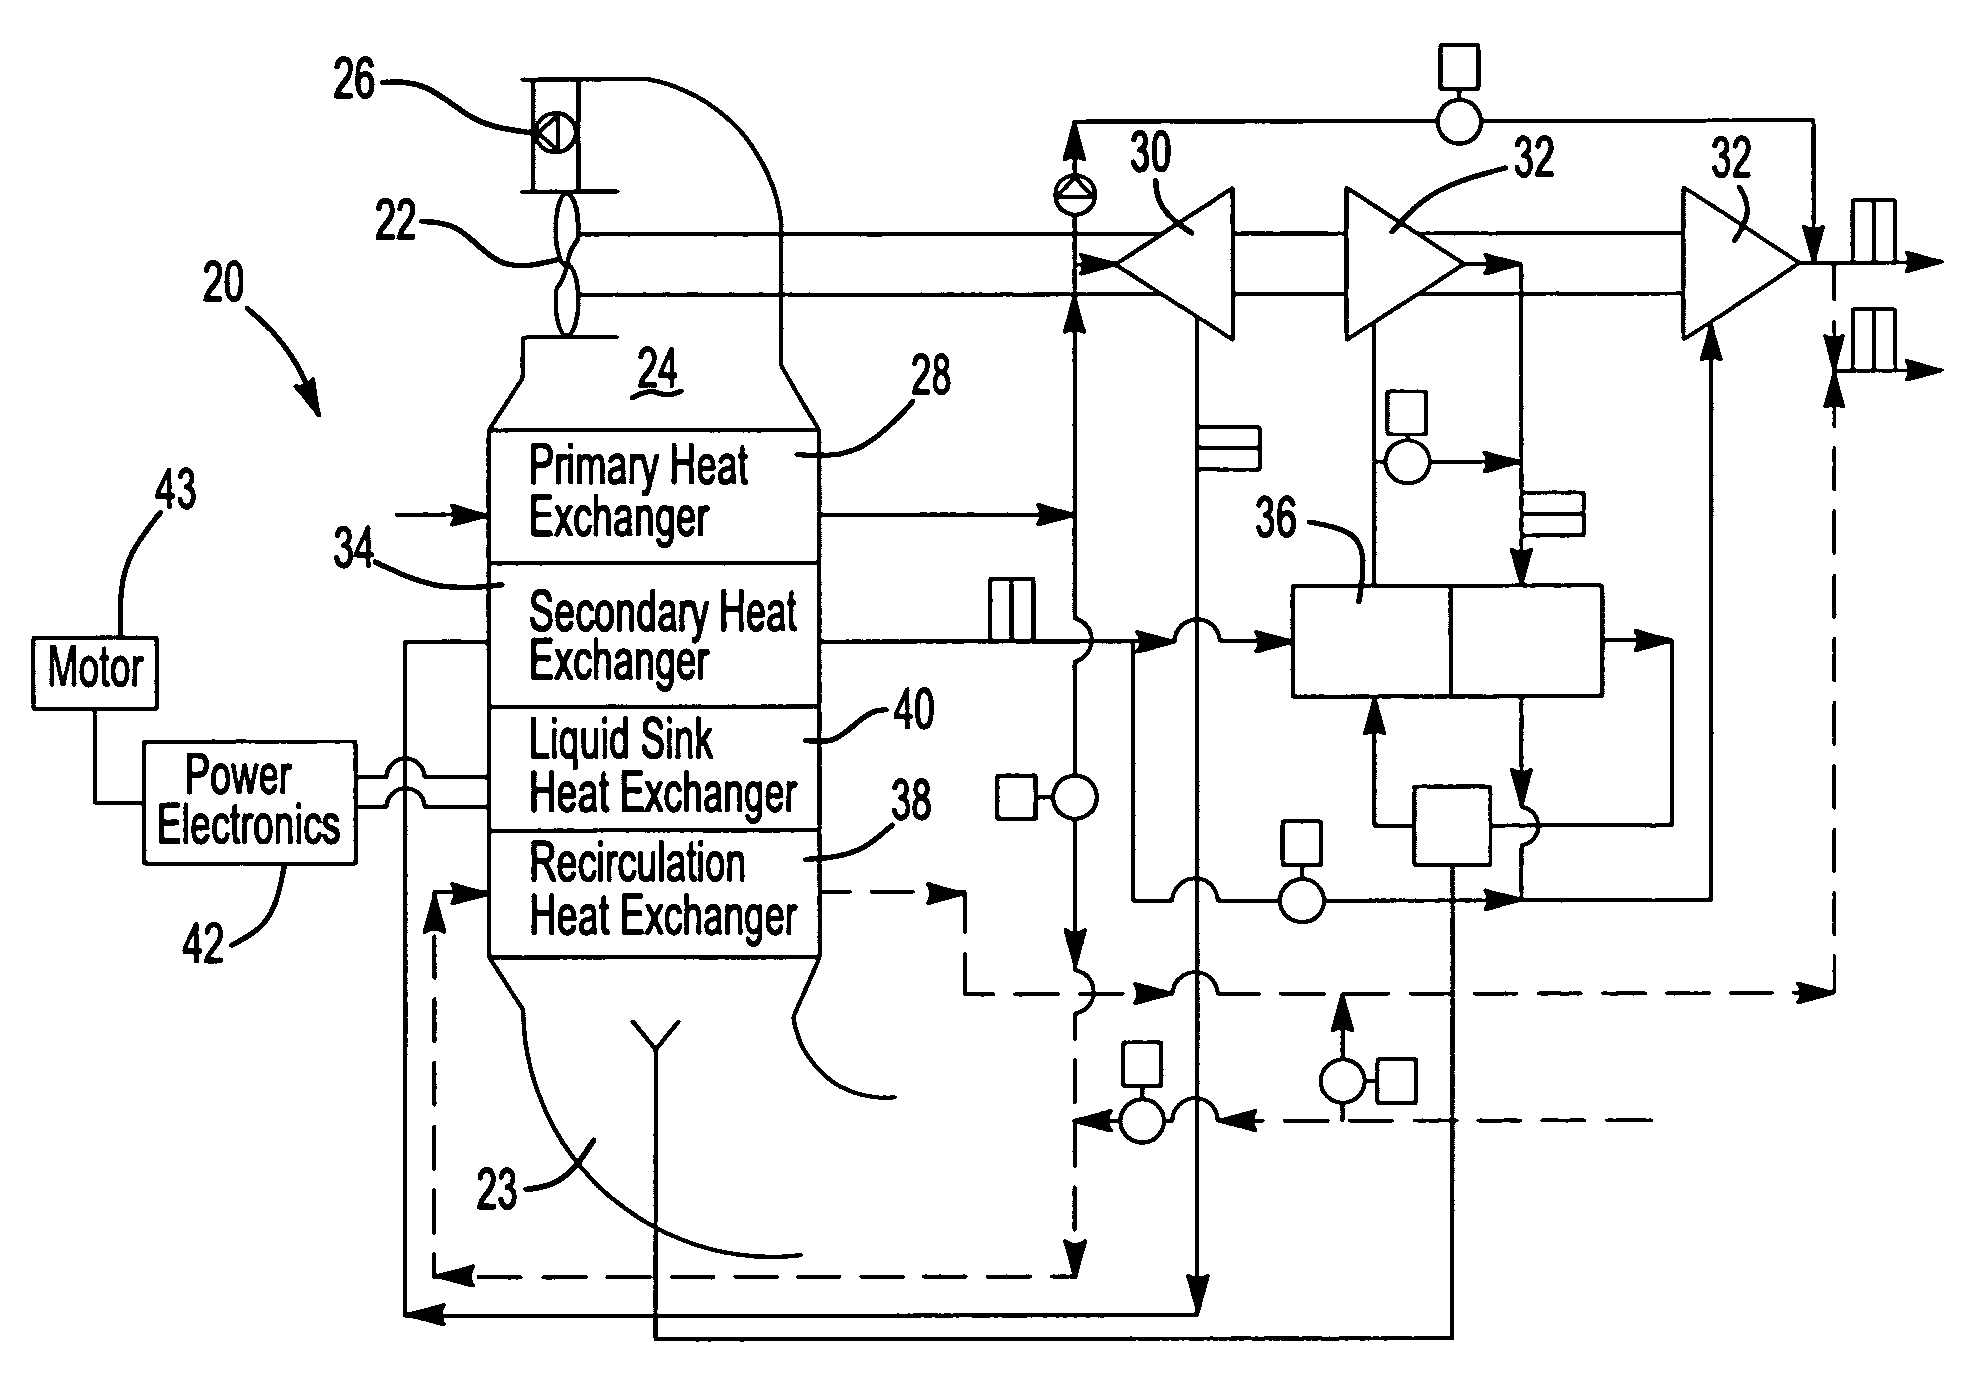 Cabin air conditioning system with liquid cooling for power electronics